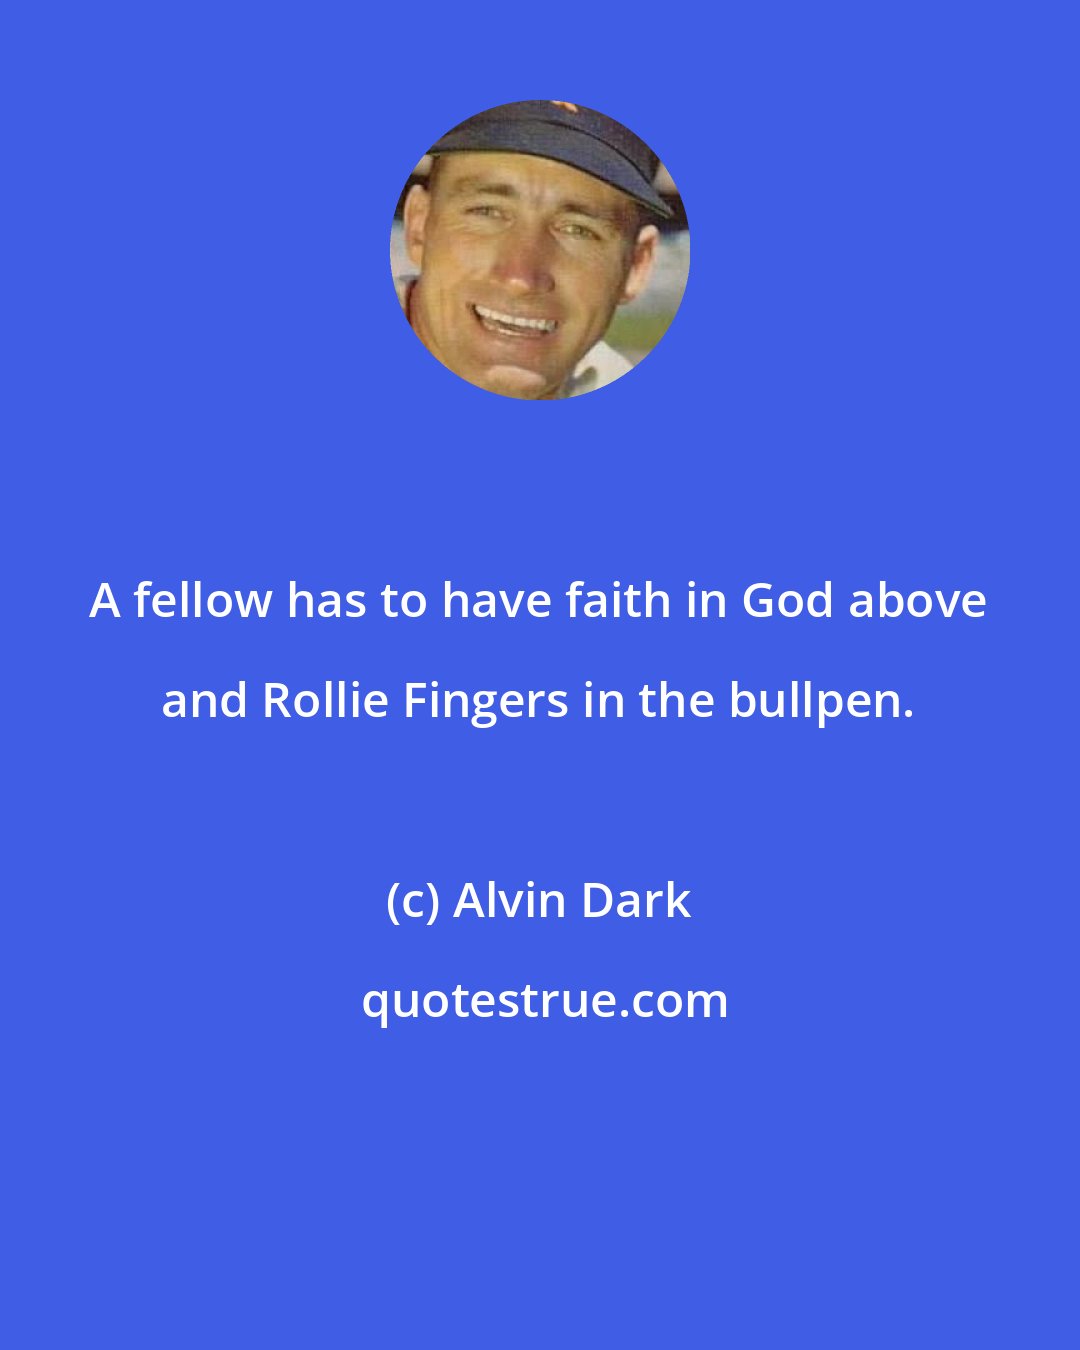 Alvin Dark: A fellow has to have faith in God above and Rollie Fingers in the bullpen.